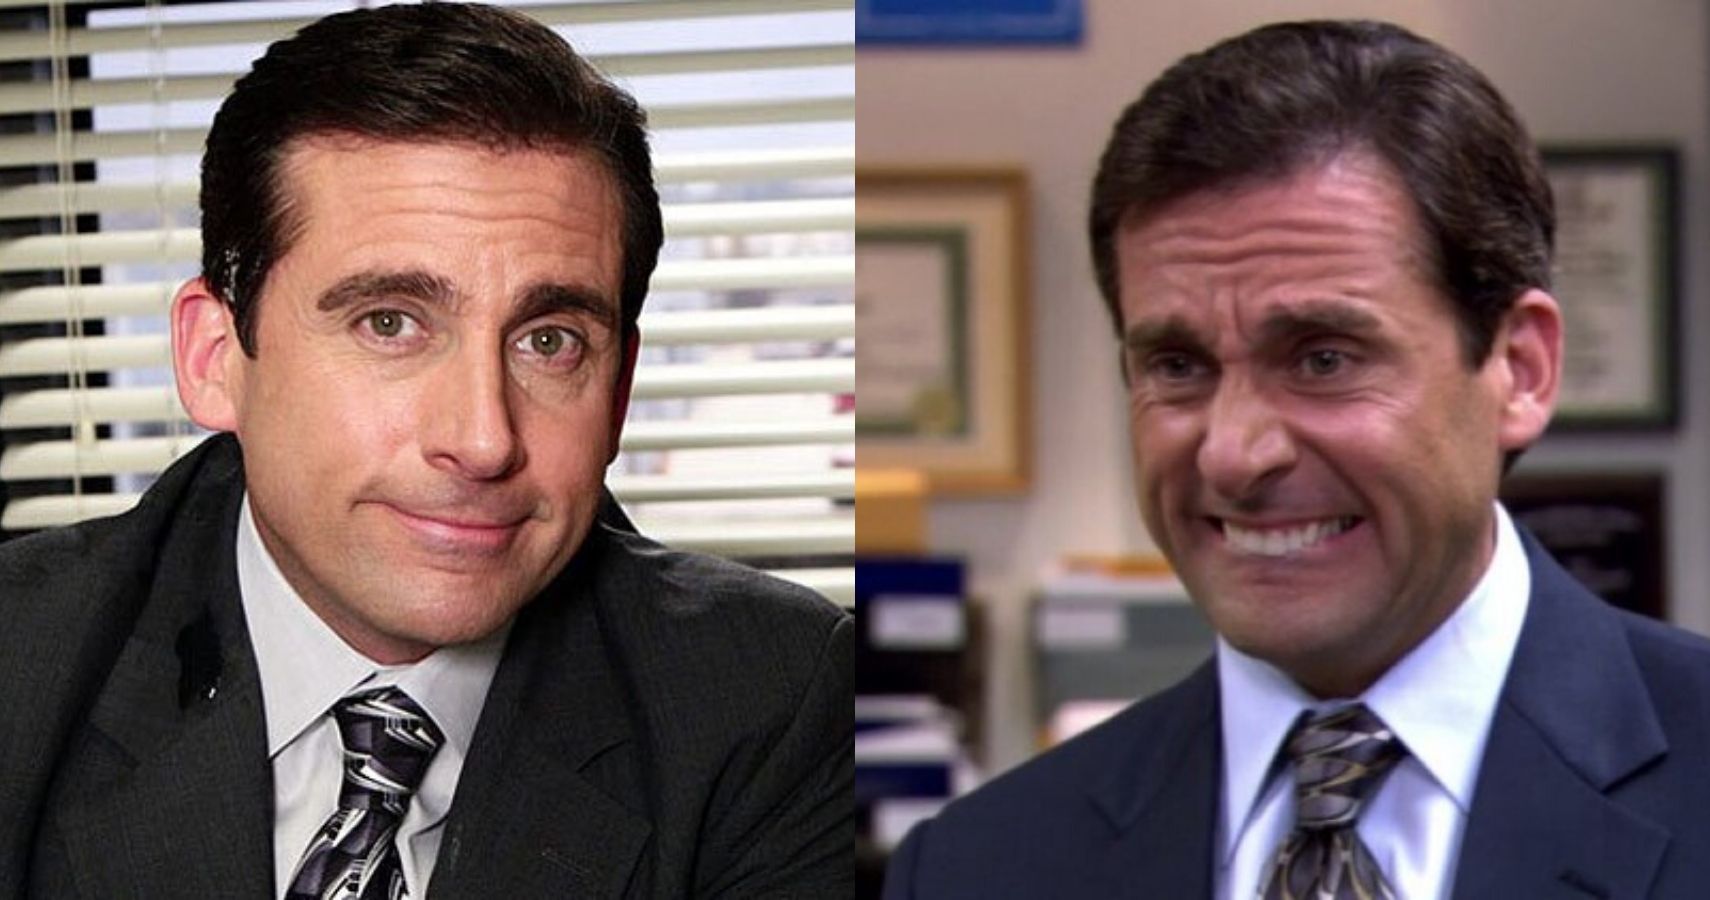 The Office: 10 Things About Michael Scott That Make No Sense